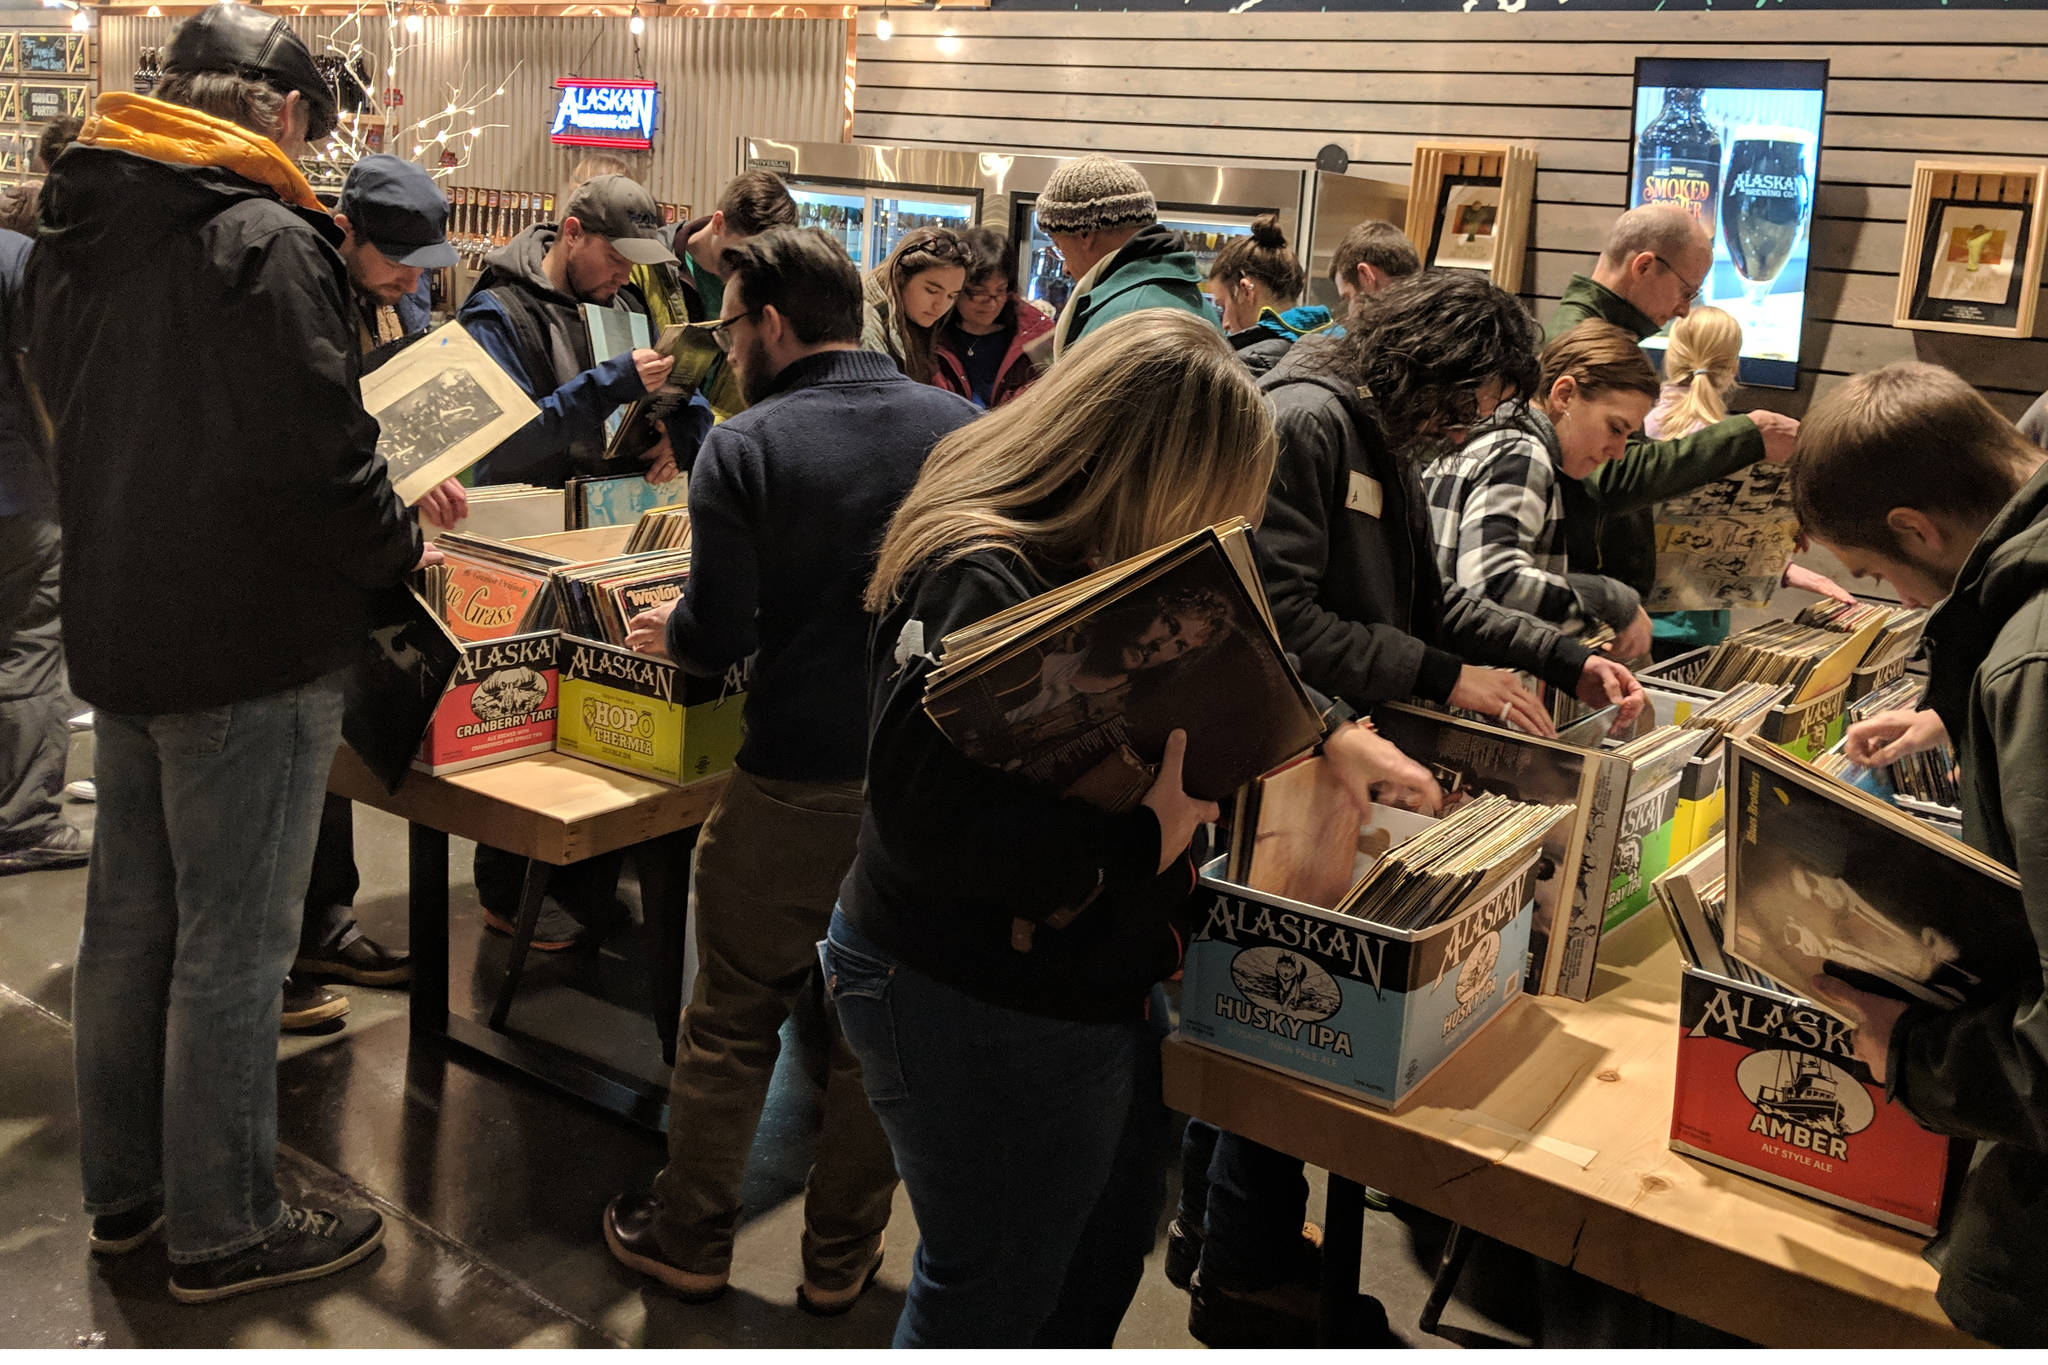 The early crowd swarms KXLL’s pop-up record shop at the Alaskan Brewing Co’s tasting room Thursday, Dec. 6, 2018. (Ben Hohenstatt | Capital City Weekly)